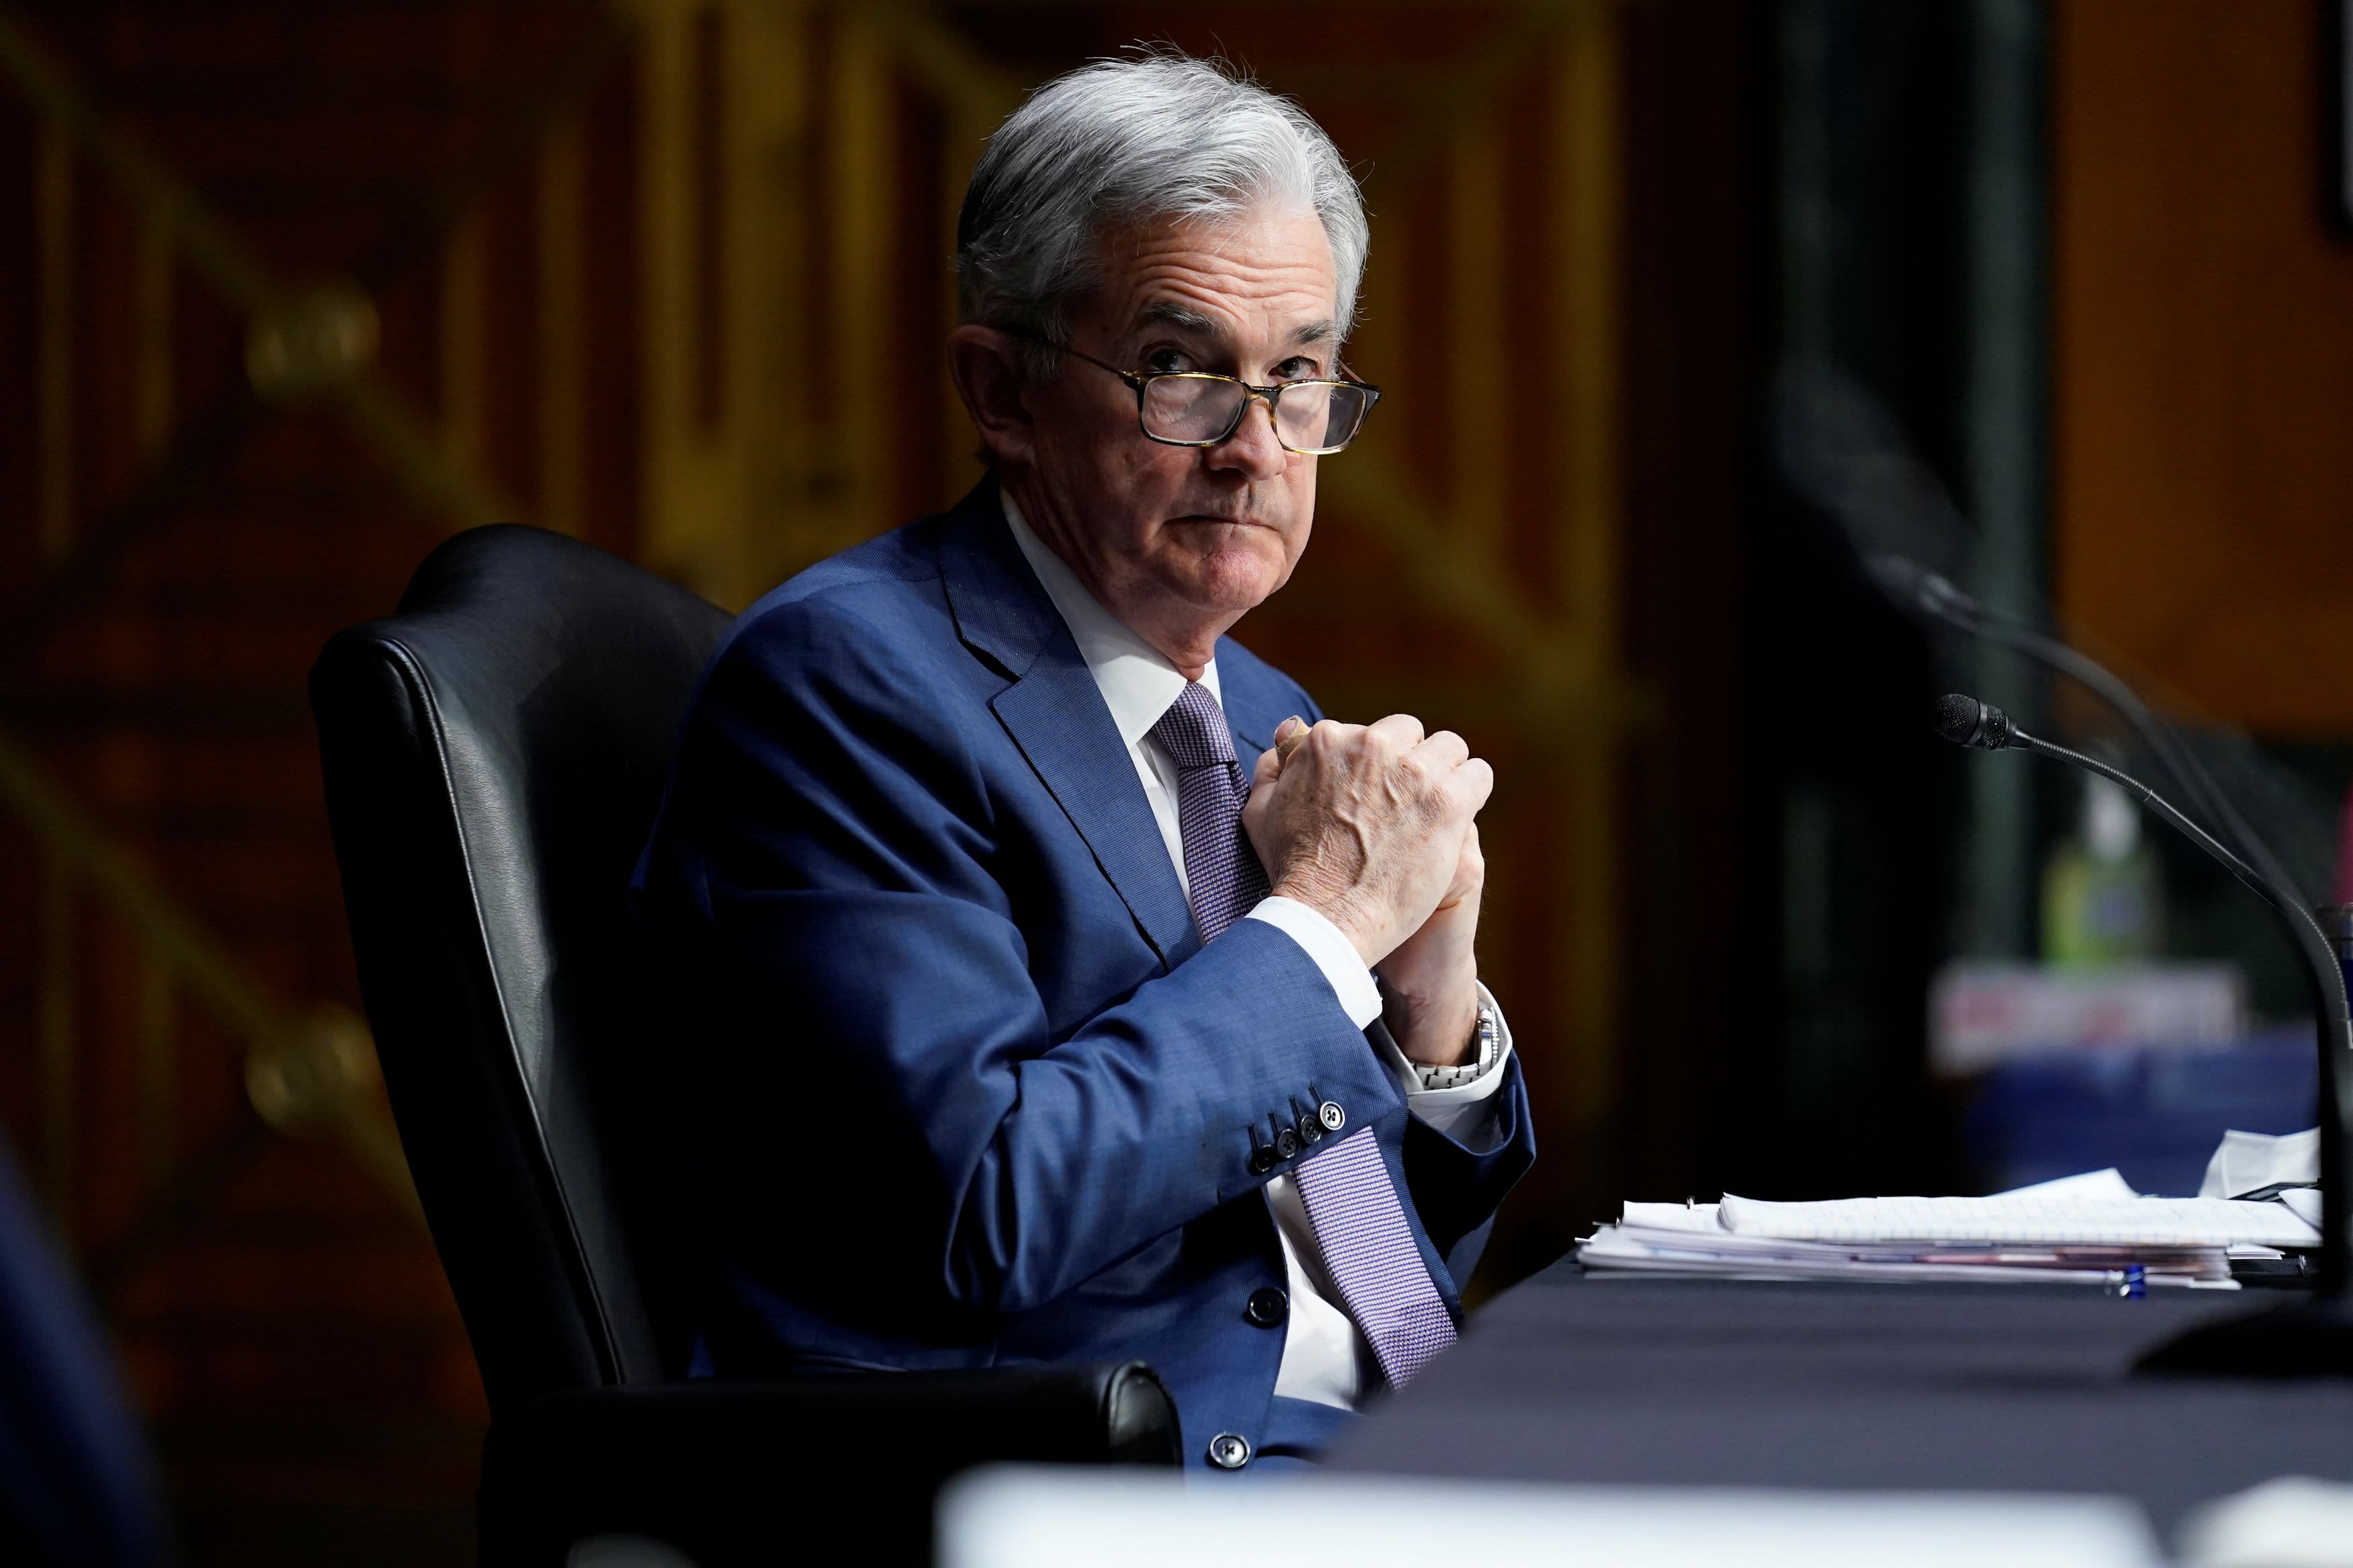 Fed could be a source of volatility as Powell speaks in the coming week